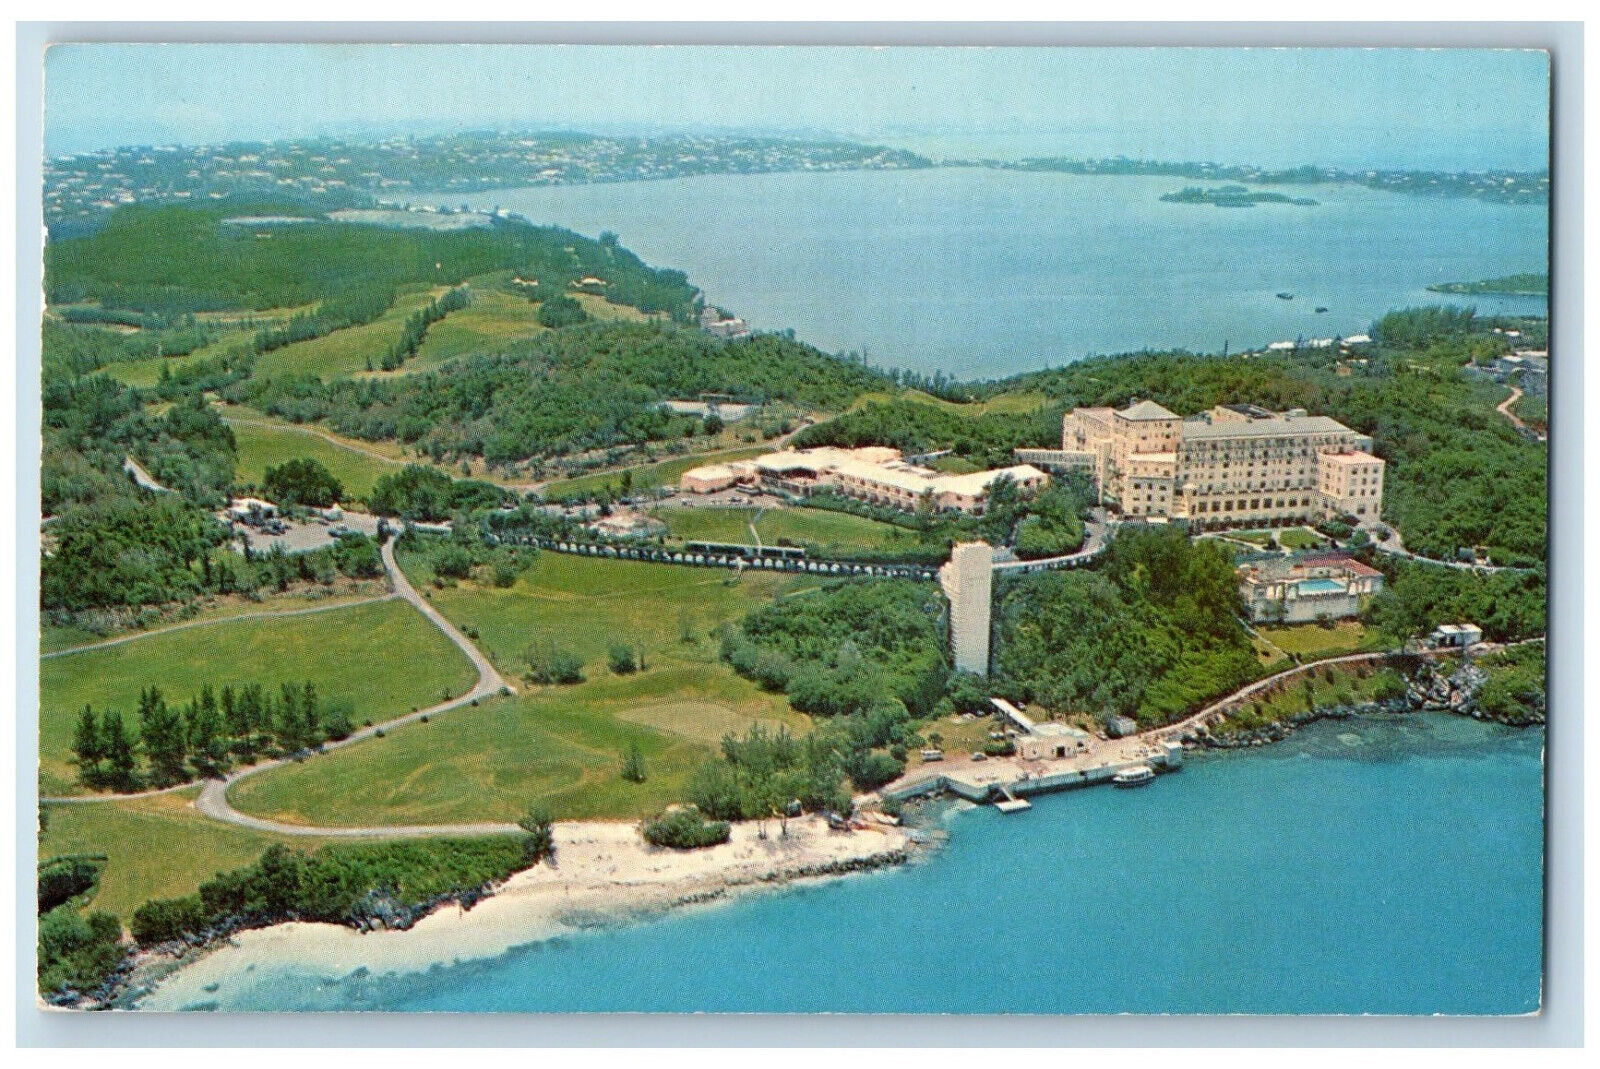 Tucker's Town Bermuda Postcard Beach and Golf Club Castle Harbour 1971 Posted